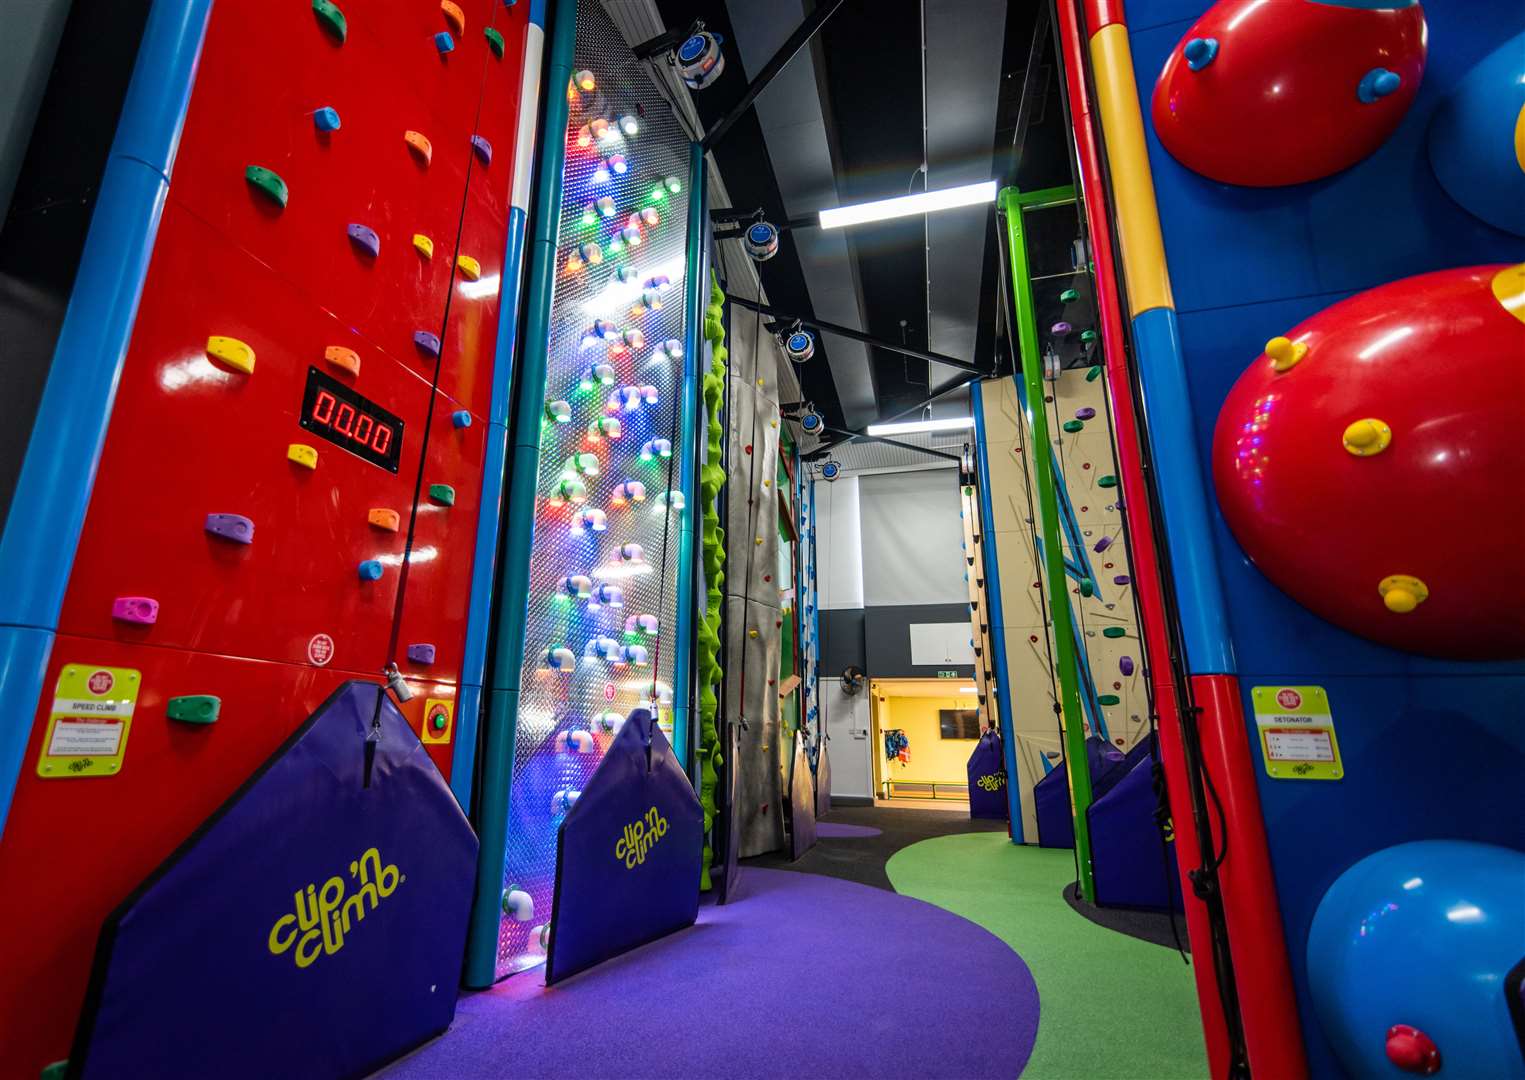 Indoor climbing, like this at Swallows Leisure Centre, is a great indoor activity